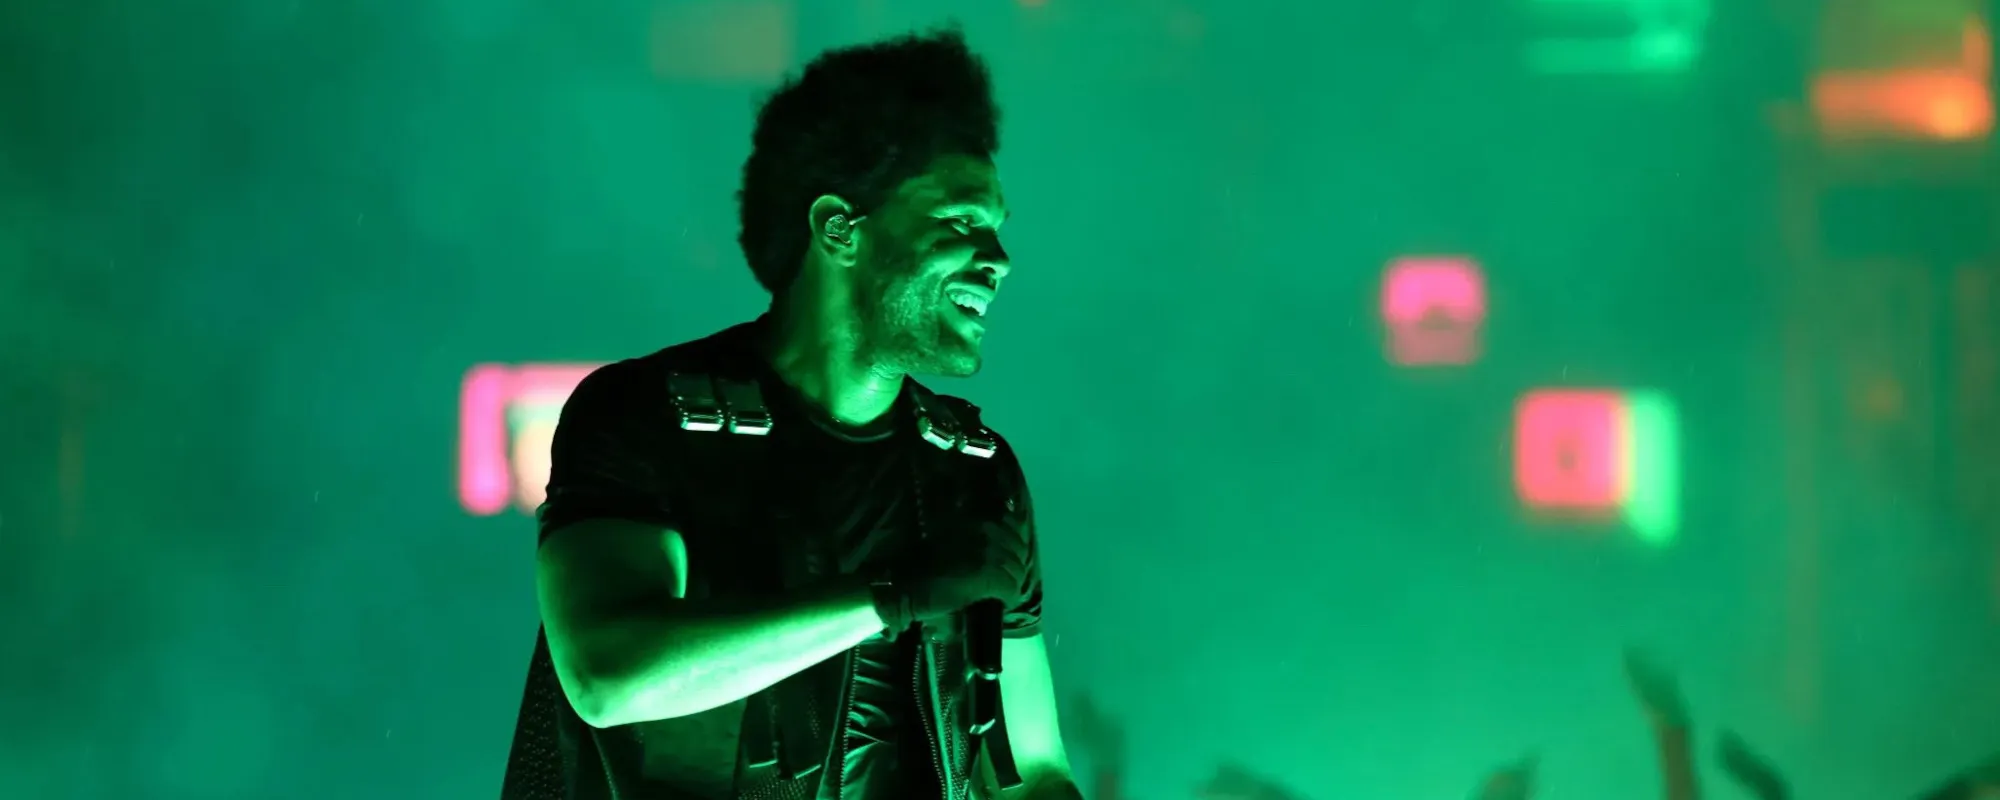 The Weeknd Sticks to Grammy Boycott, Doesn’t Submit ‘Dawn FM’ for Consideration